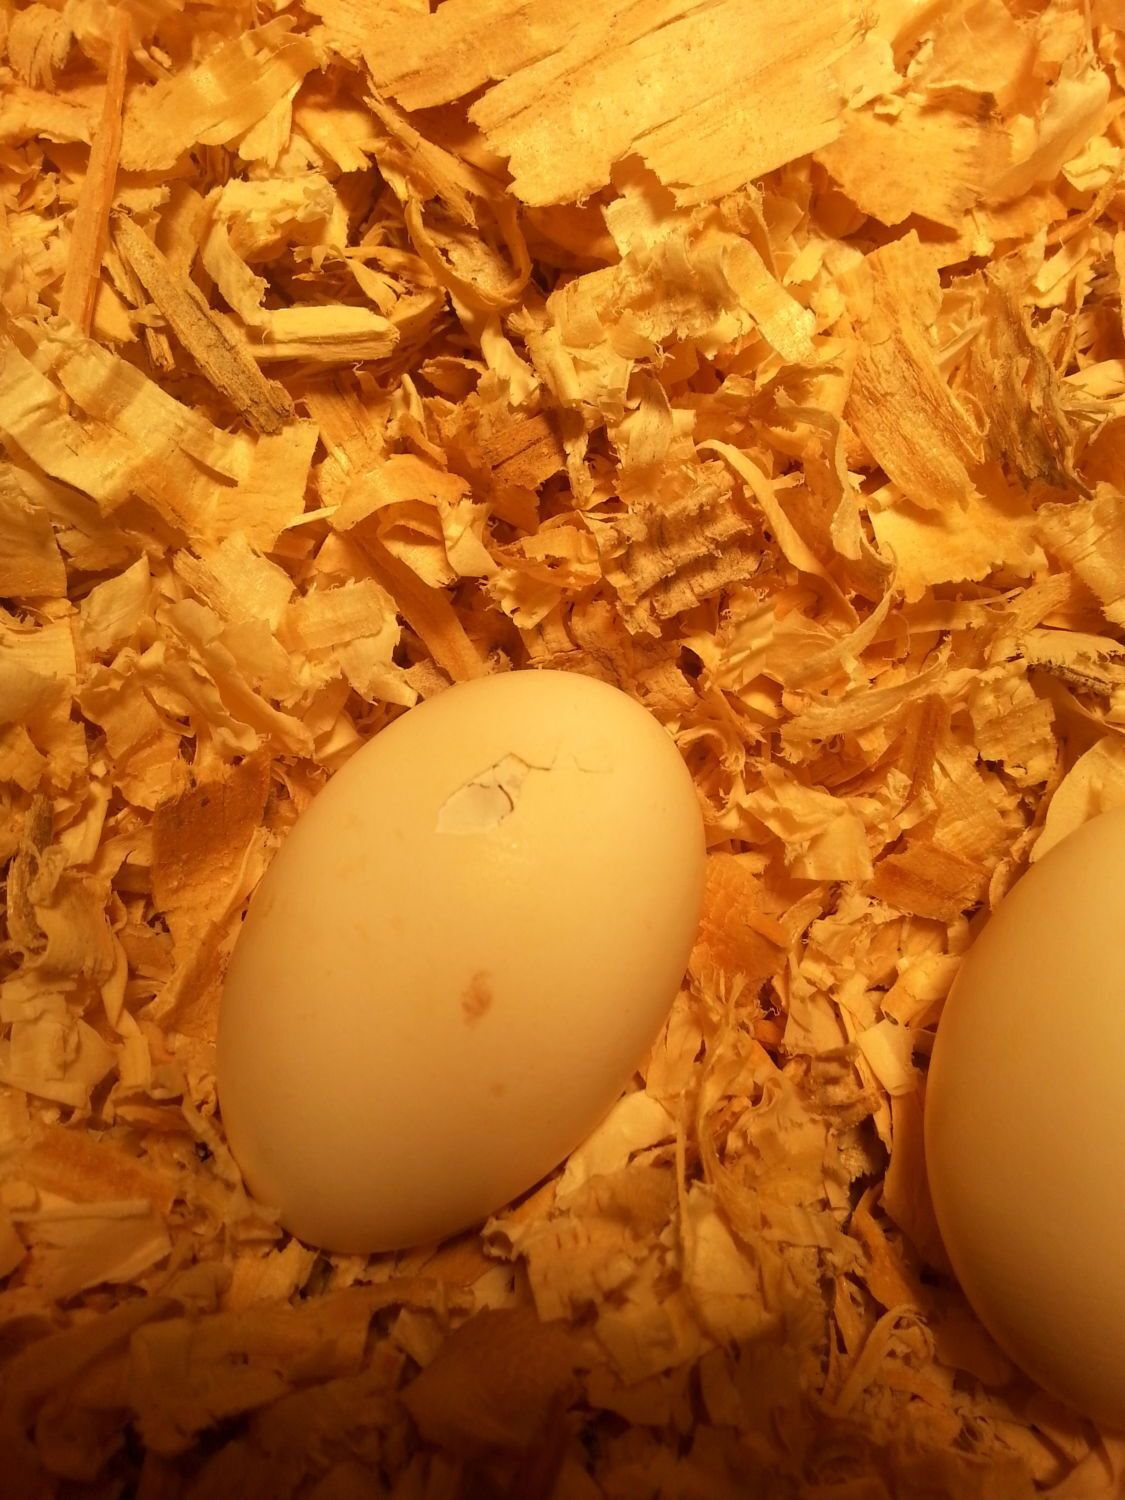 Hen left hatching eggs | BackYard Chickens - Learn How to ...